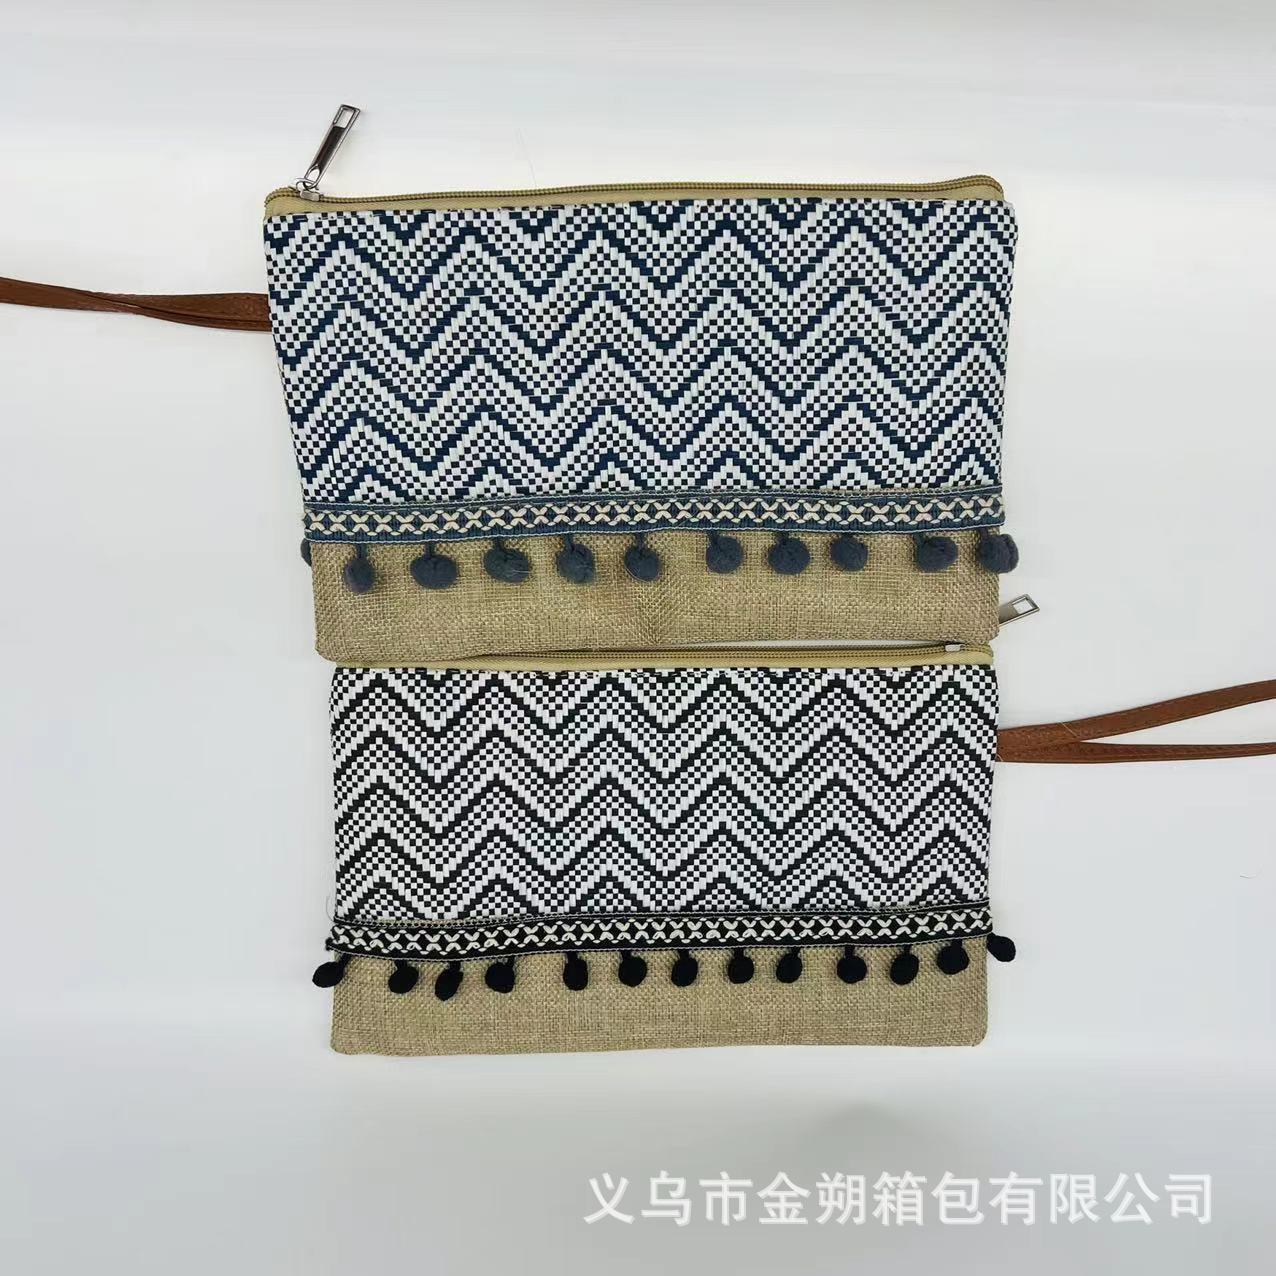 New Double-Sided Cotton and Linen Straw Tassel Striped Bag Clutch Bag Small Bag Cosmetic Bag Mobile Phone Bag Coin Pocket